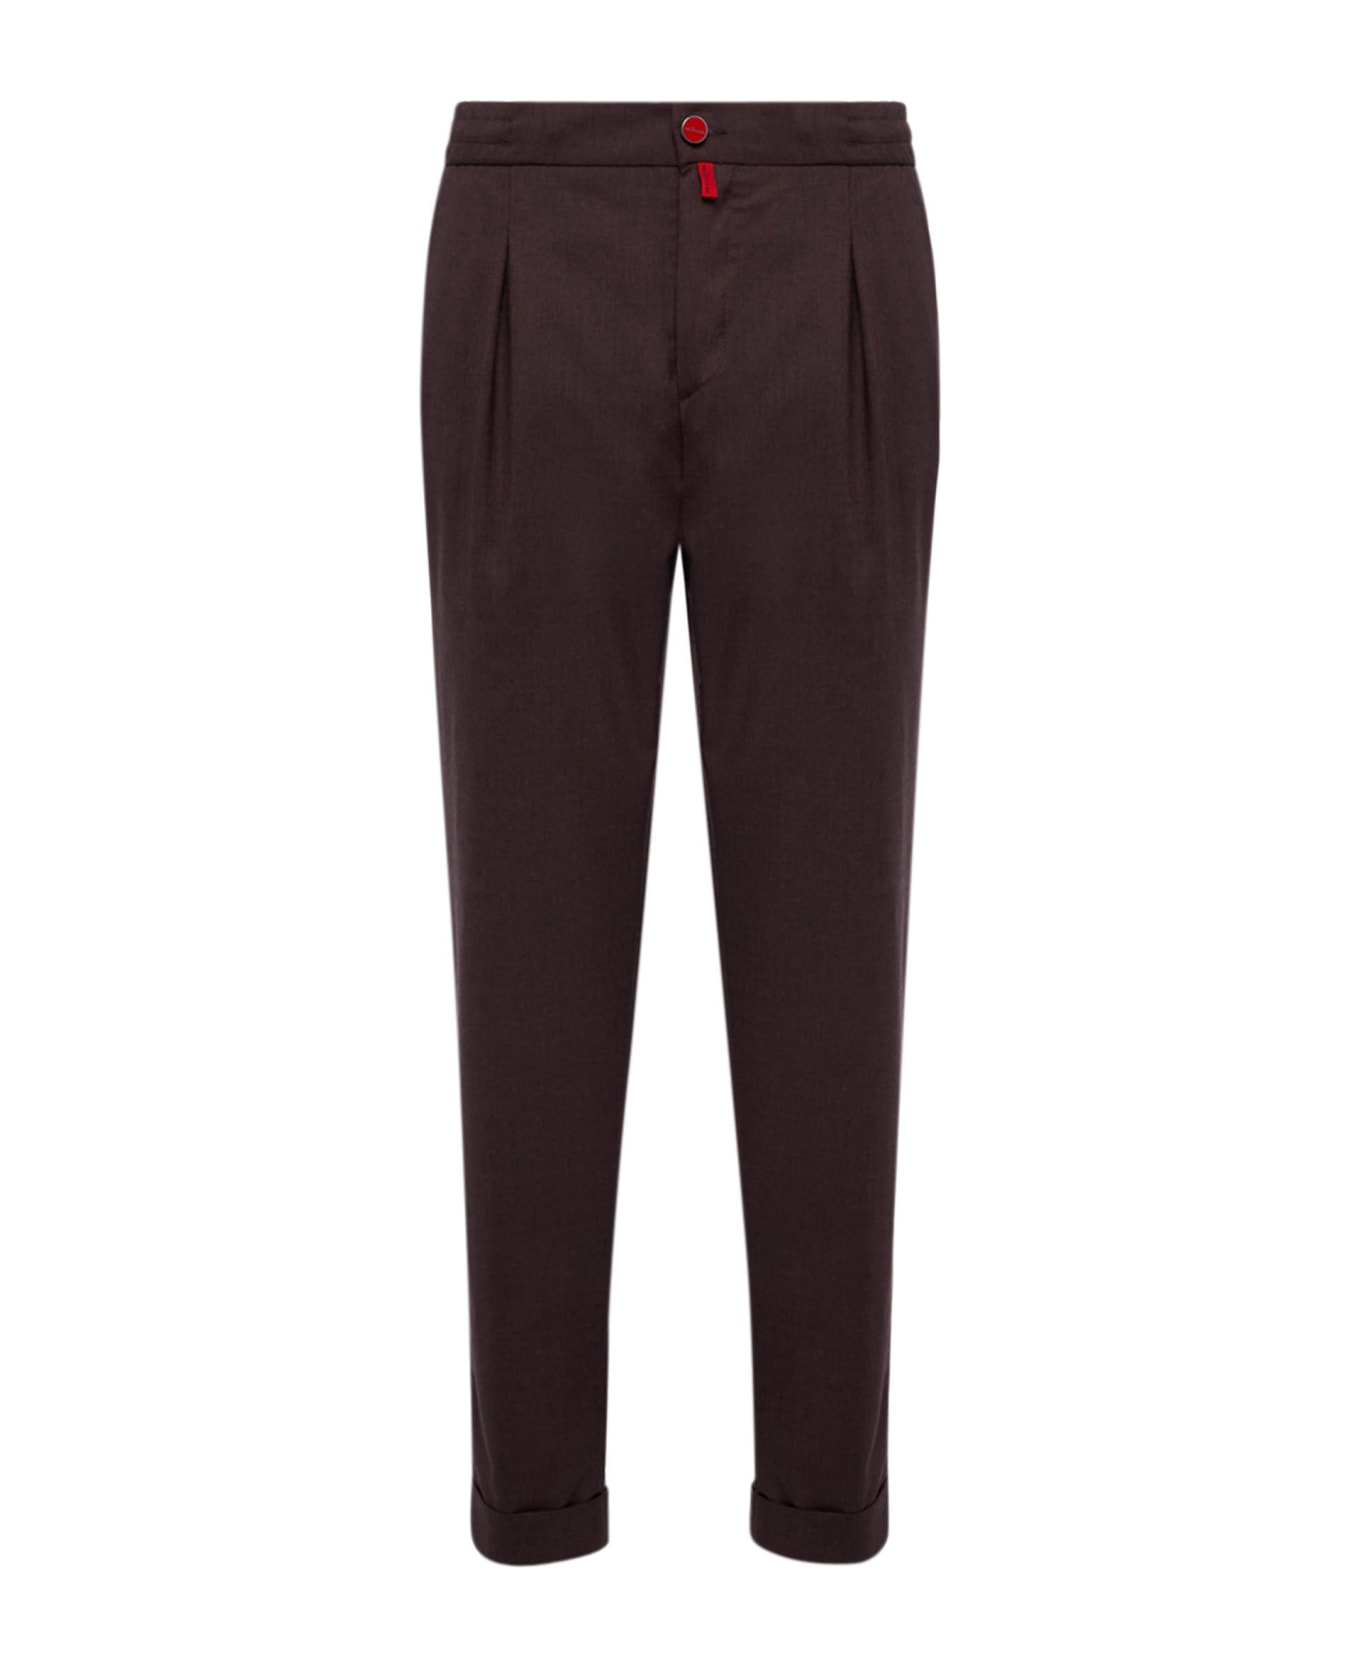 Kiton Trousers Cashmere - BROWN